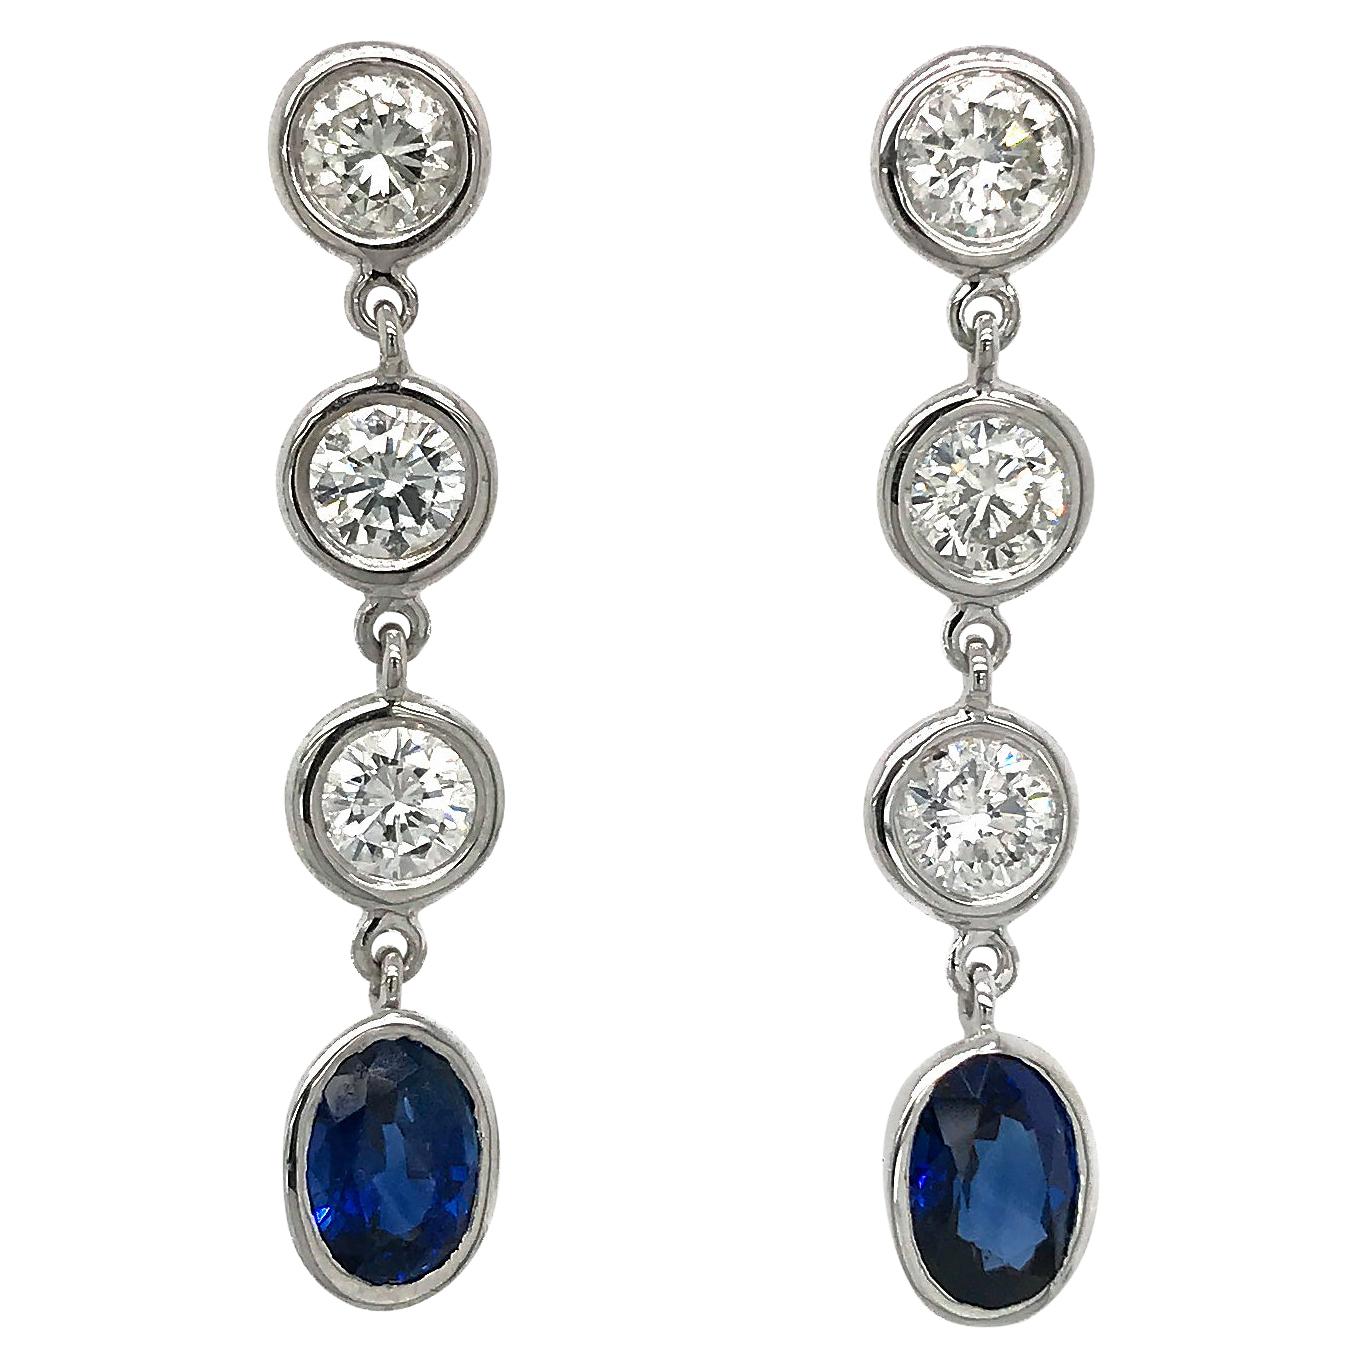 Fab Drops 14 Karat White Gold Round Diamond and Sapphire Drop Earrings For Sale